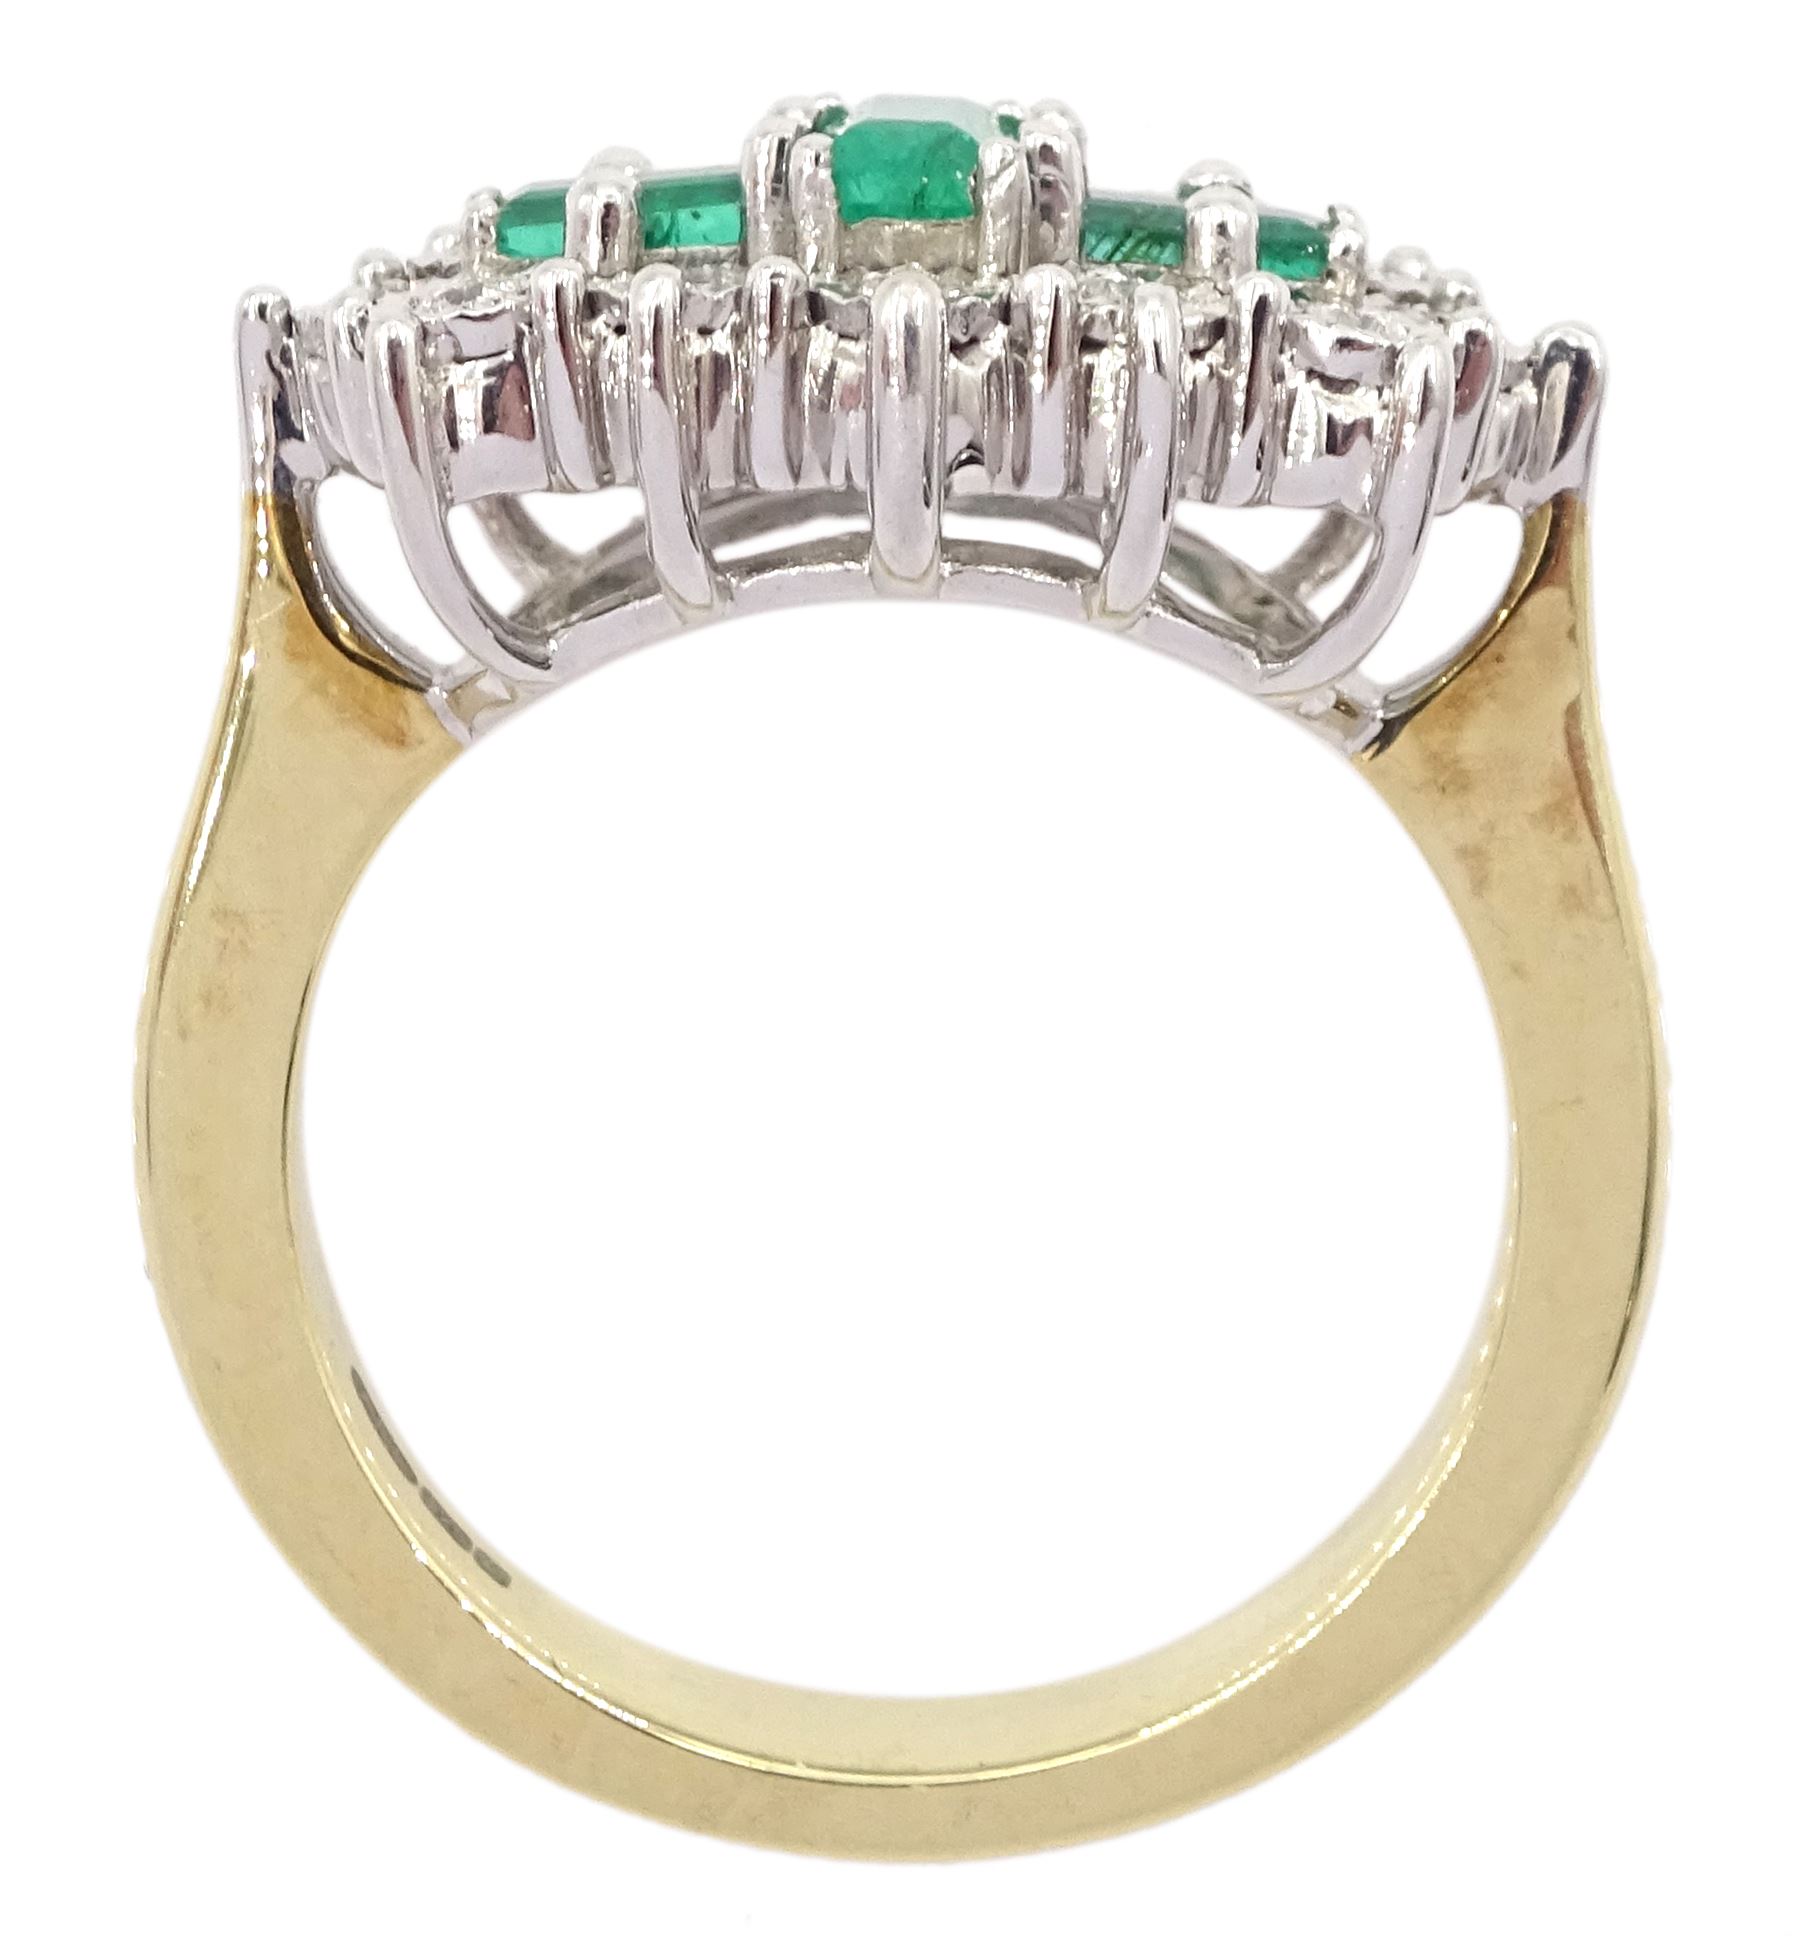 9ct gold emerald and diamond cluster ring - Image 4 of 4